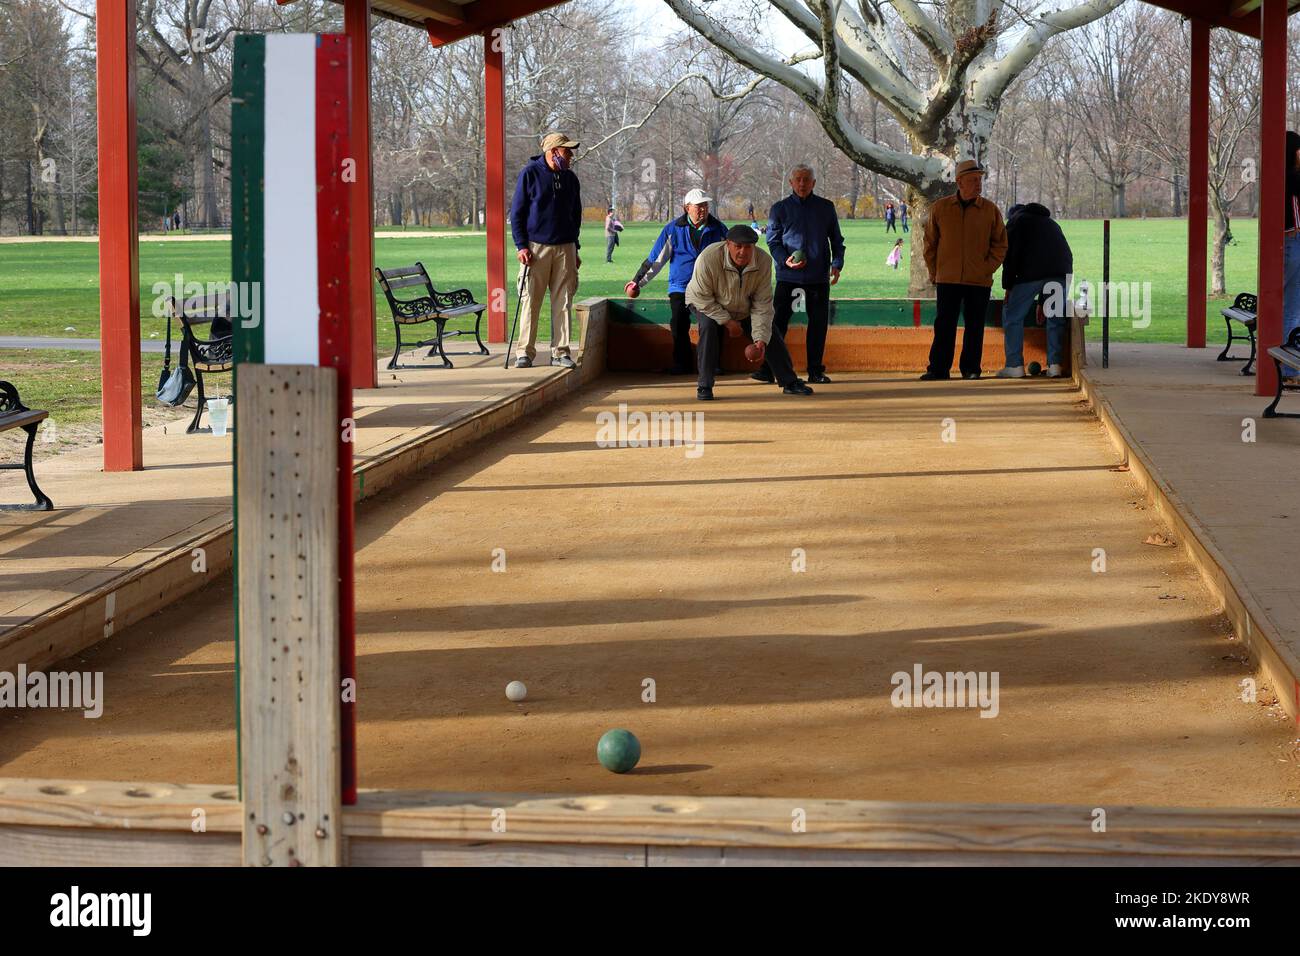 Italian-American seniors play bocce at a covered, outdoor bocce court at Cherry Blossom Welcome Center in Branch Brook Park, Belleville, New Jersey Stock Photo